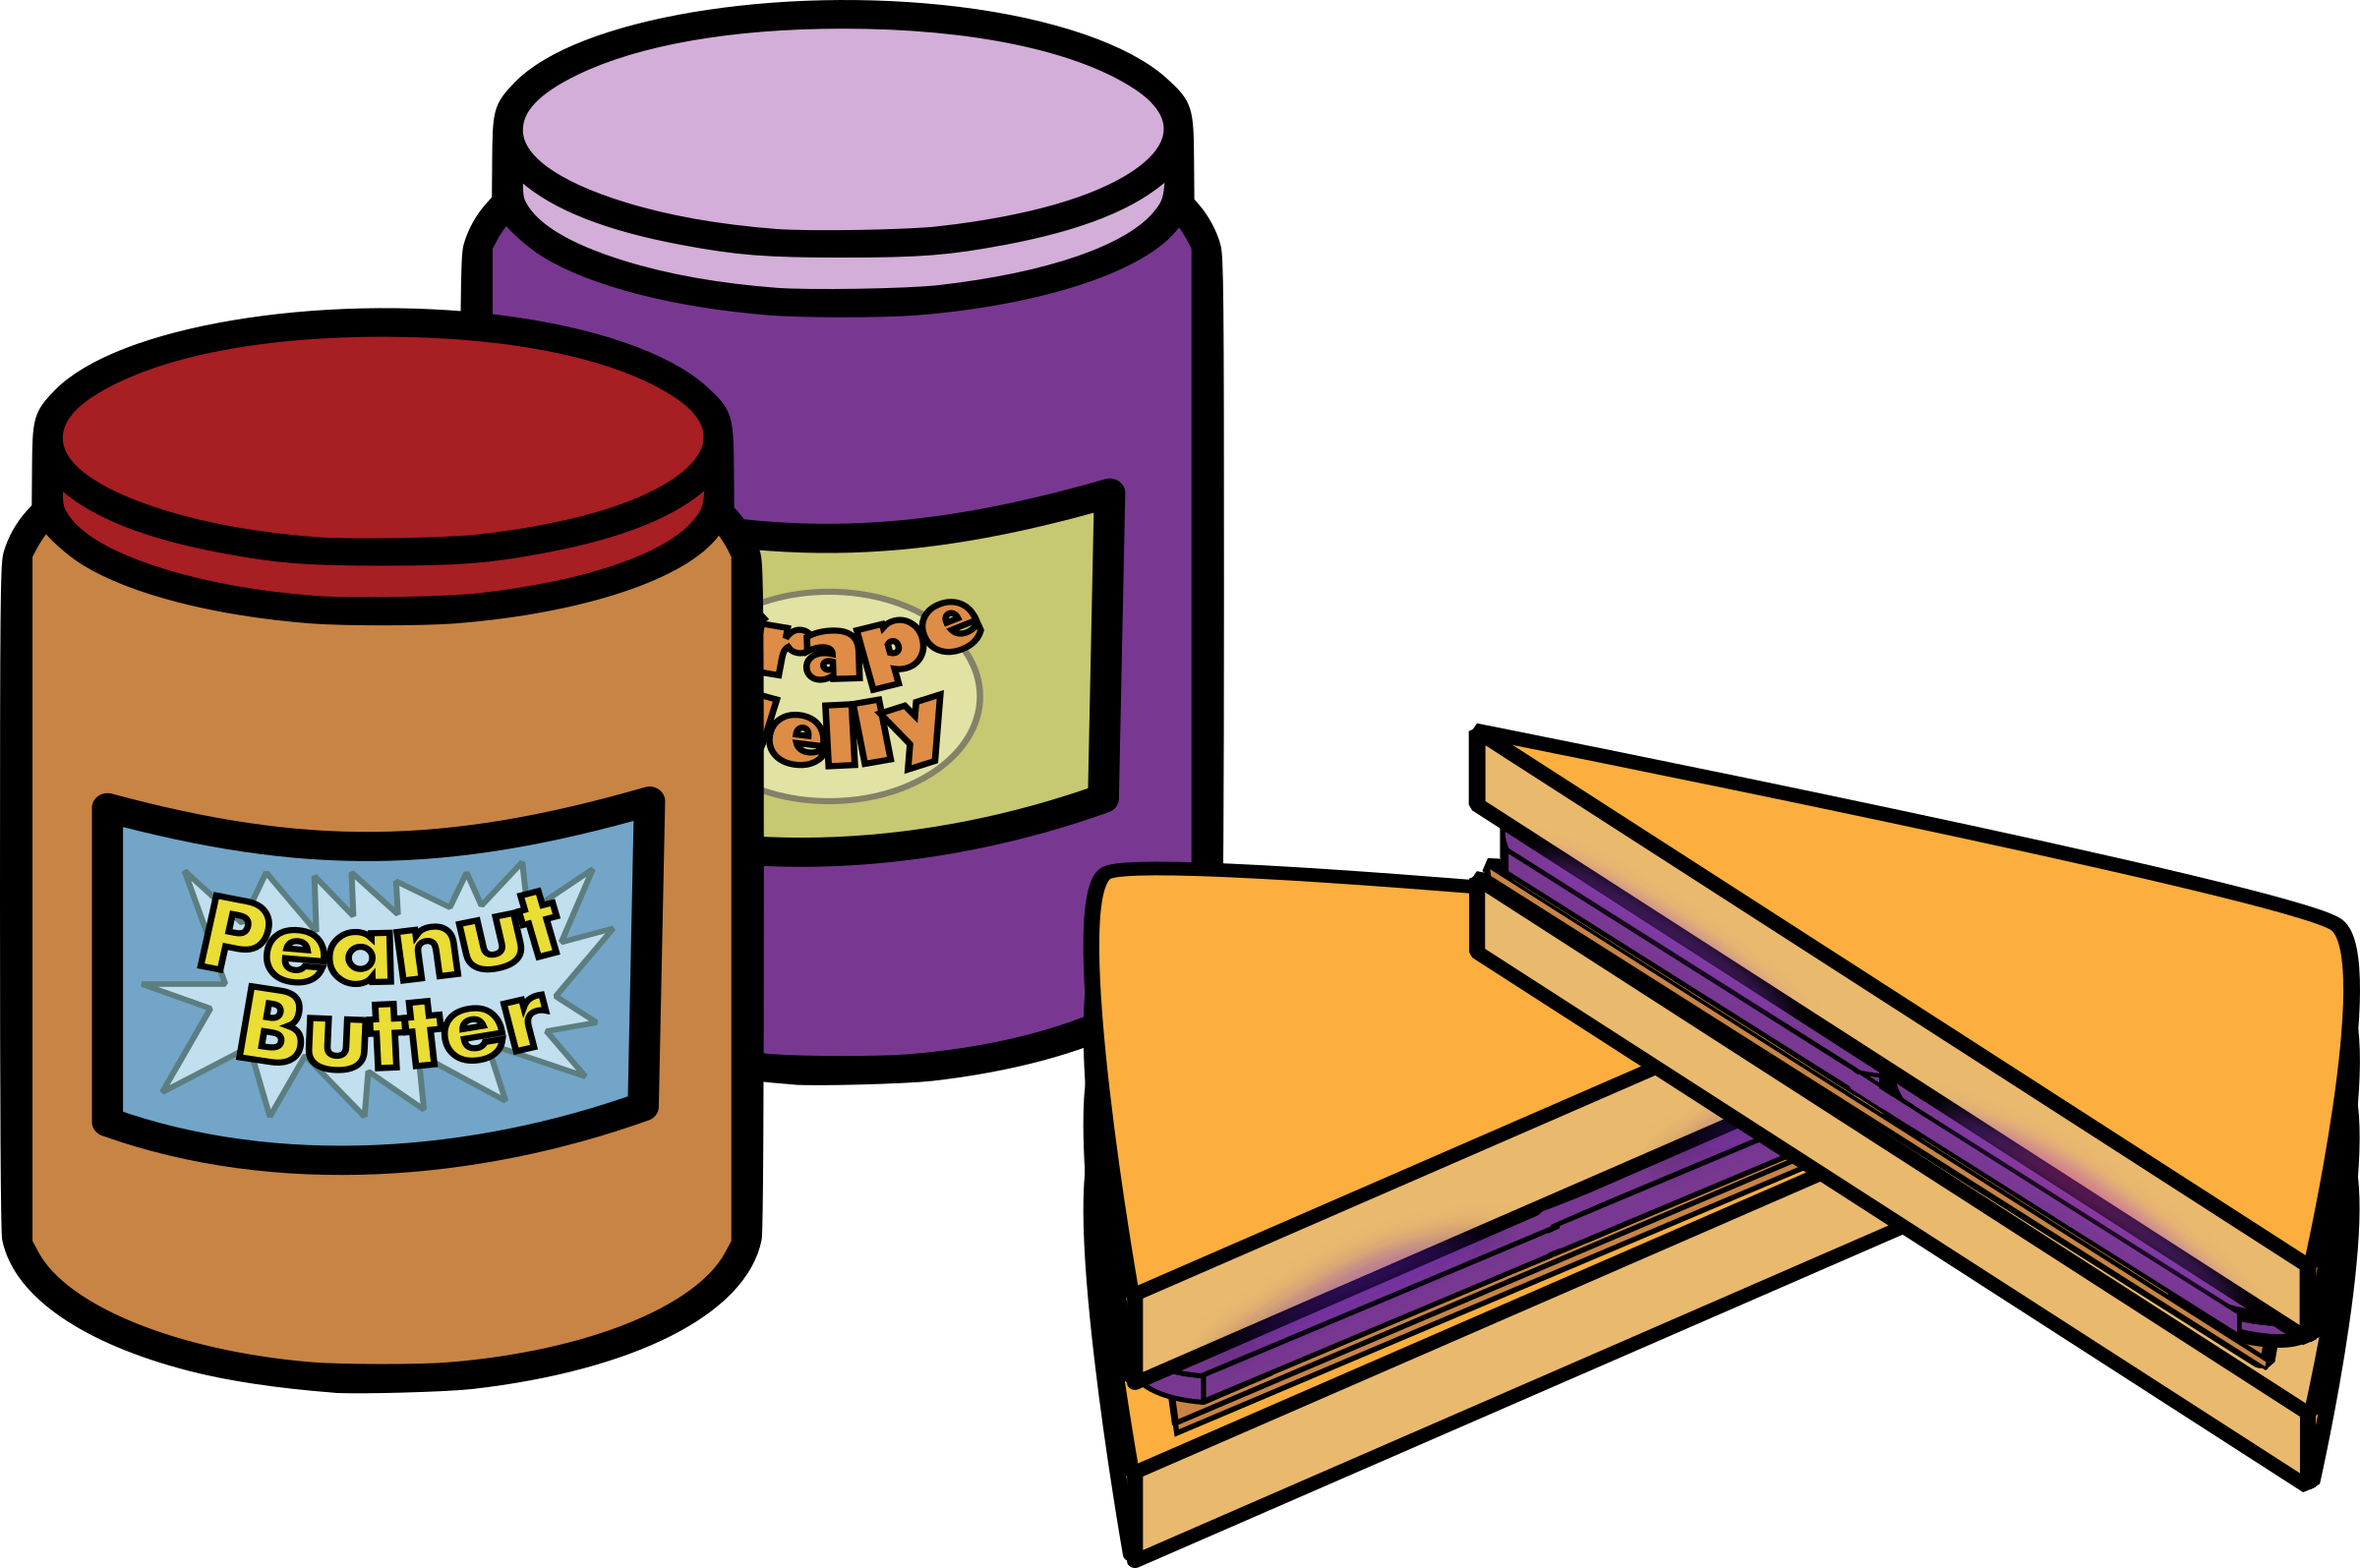 Big Image - Peanut Butter And Jelly Sandwich - (2400x1595) Png Clipart Down...